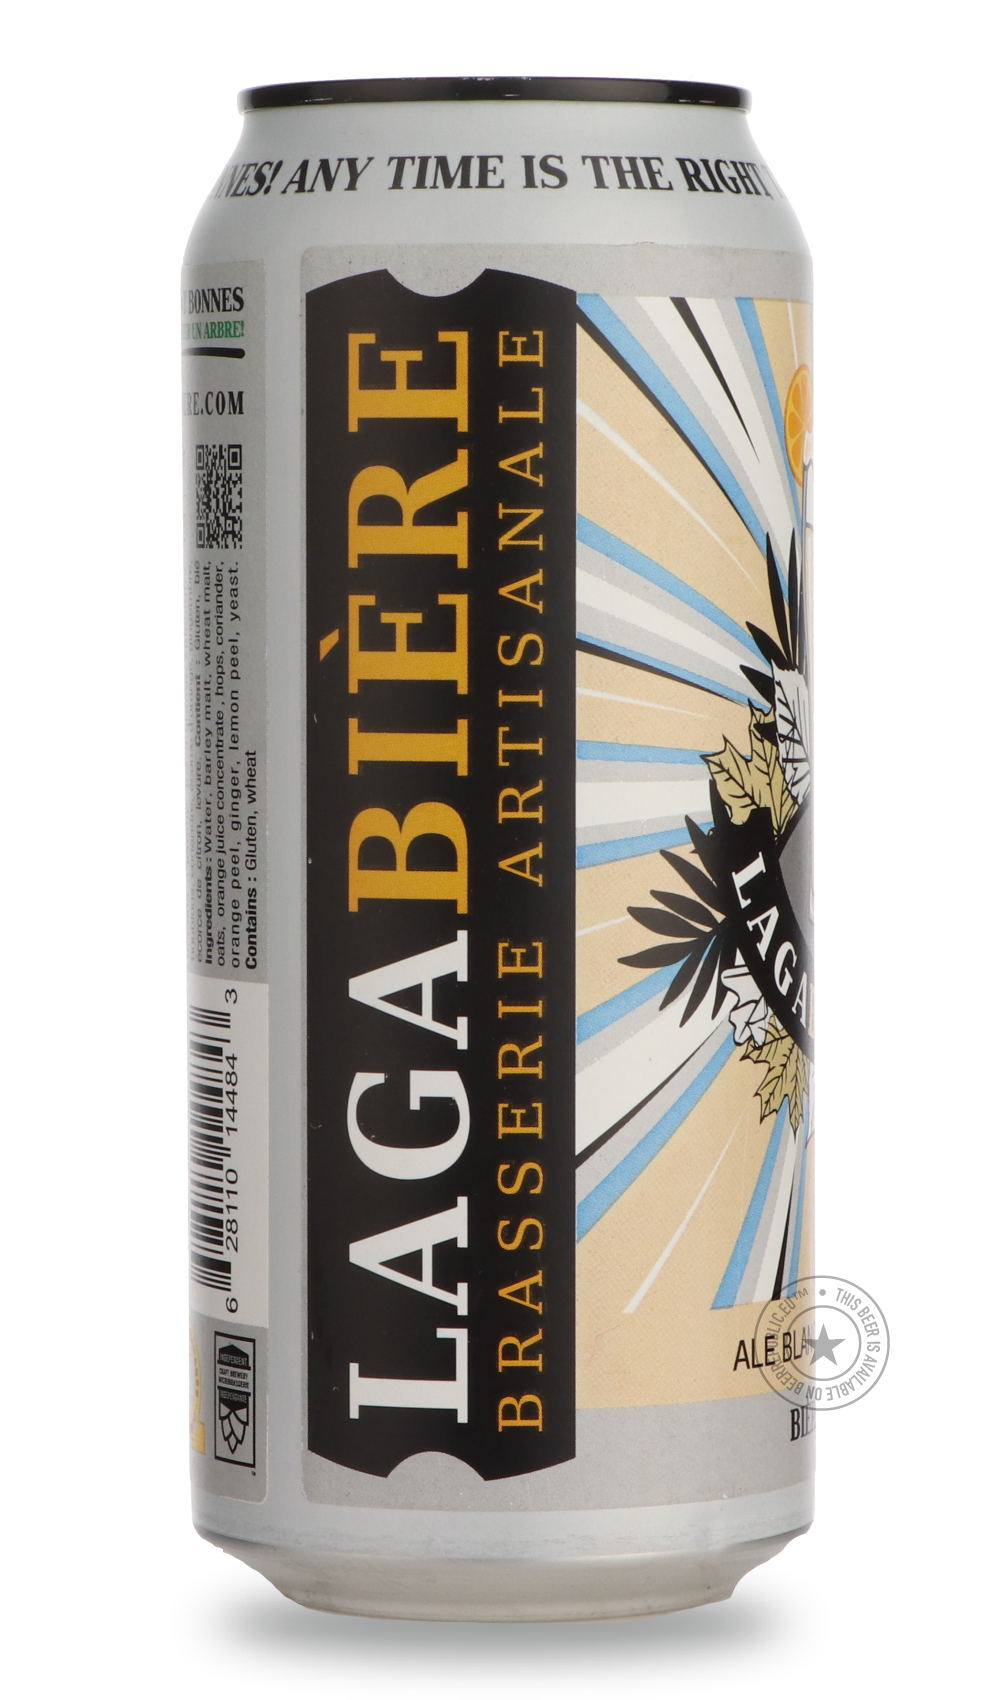 -Lagabière- Lagablanche-Pale- Only @ Beer Republic - The best online beer store for American & Canadian craft beer - Buy beer online from the USA and Canada - Bier online kopen - Amerikaans bier kopen - Craft beer store - Craft beer kopen - Amerikanisch bier kaufen - Bier online kaufen - Acheter biere online - IPA - Stout - Porter - New England IPA - Hazy IPA - Imperial Stout - Barrel Aged - Barrel Aged Imperial Stout - Brown - Dark beer - Blond - Blonde - Pilsner - Lager - Wheat - Weizen - Amber - Barley W